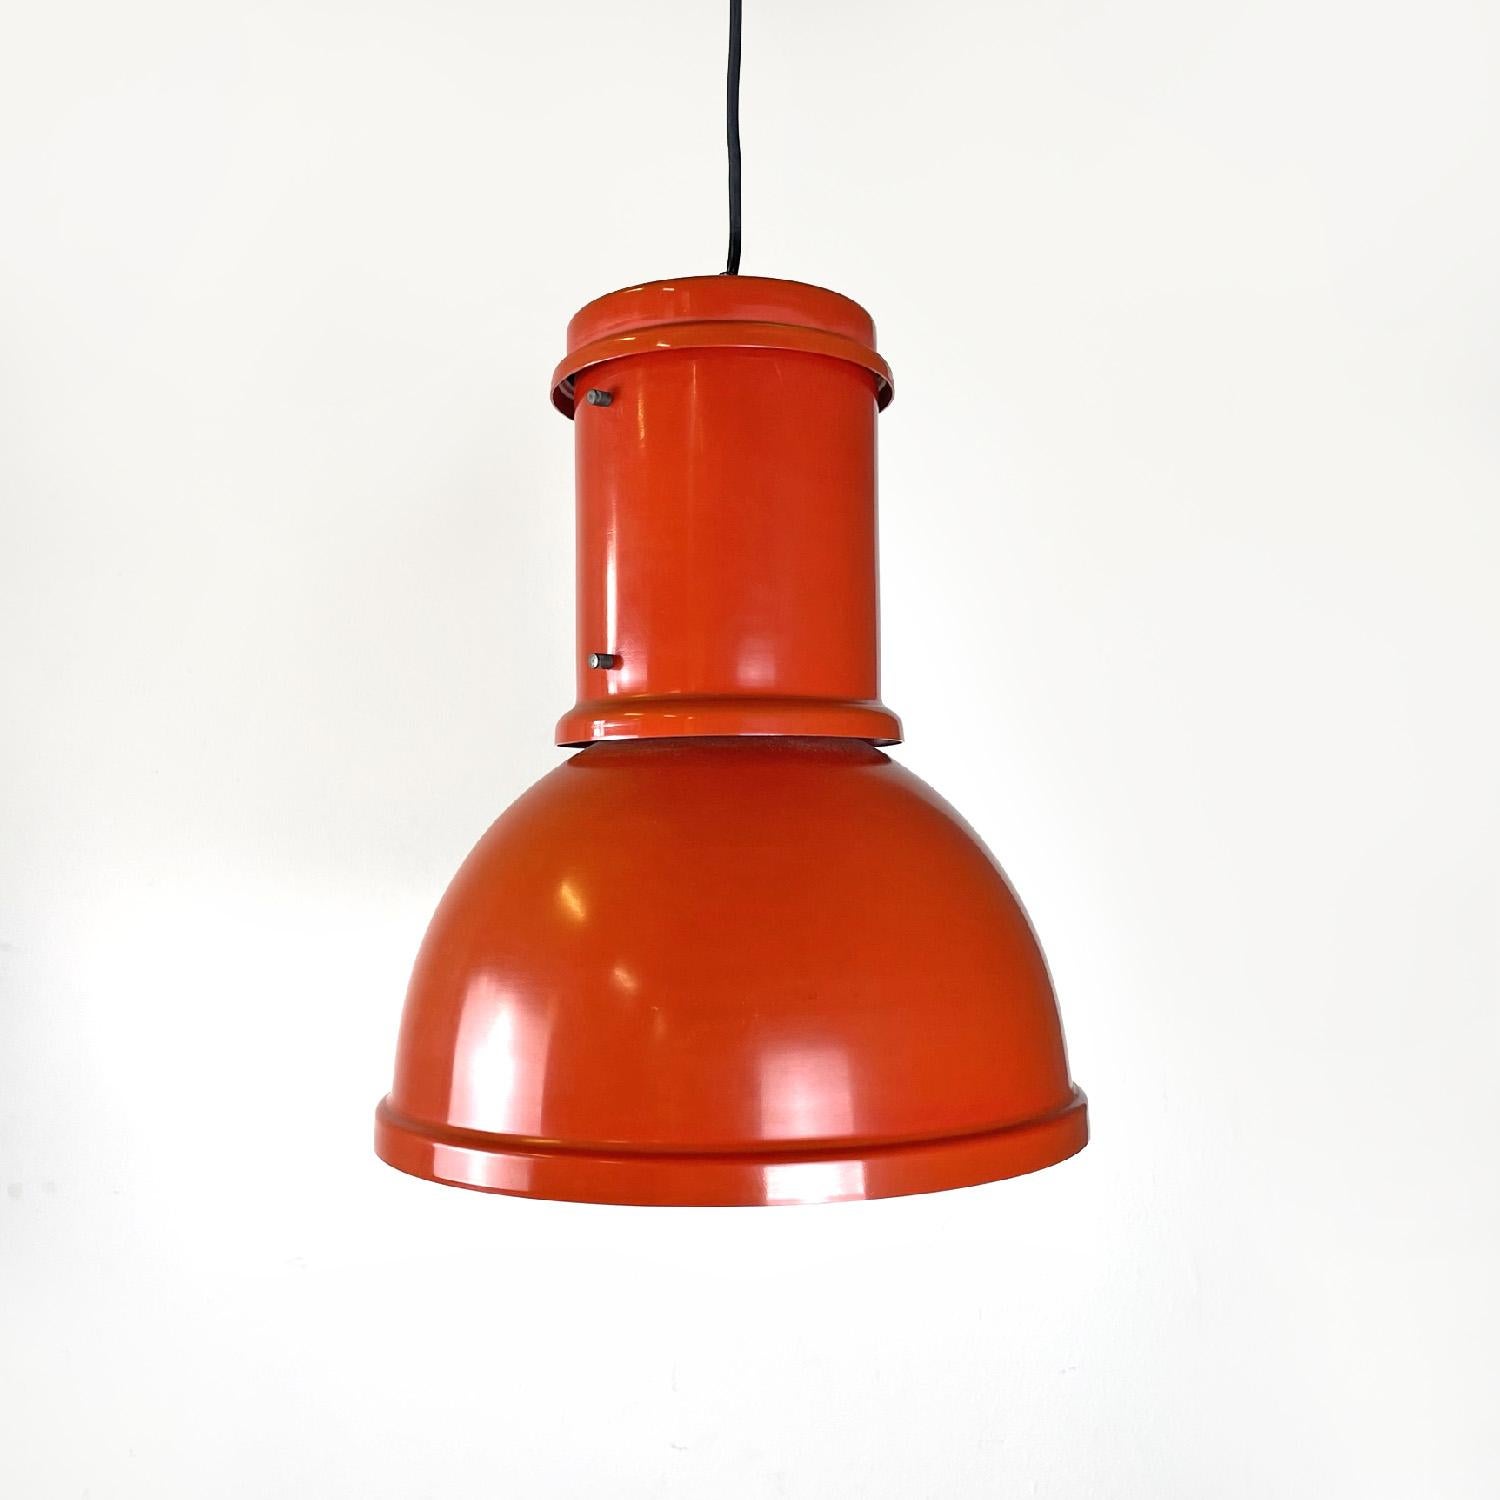 Italian red chandelier Lampara by Roberto Menghi for Fontana Arte, 1960s
Chandelier mod. Lampara with round base in orange-red lacquered aluminum. It has a dome-shaped lampshade lacquered white internally, in the upper part there is a cylindrical